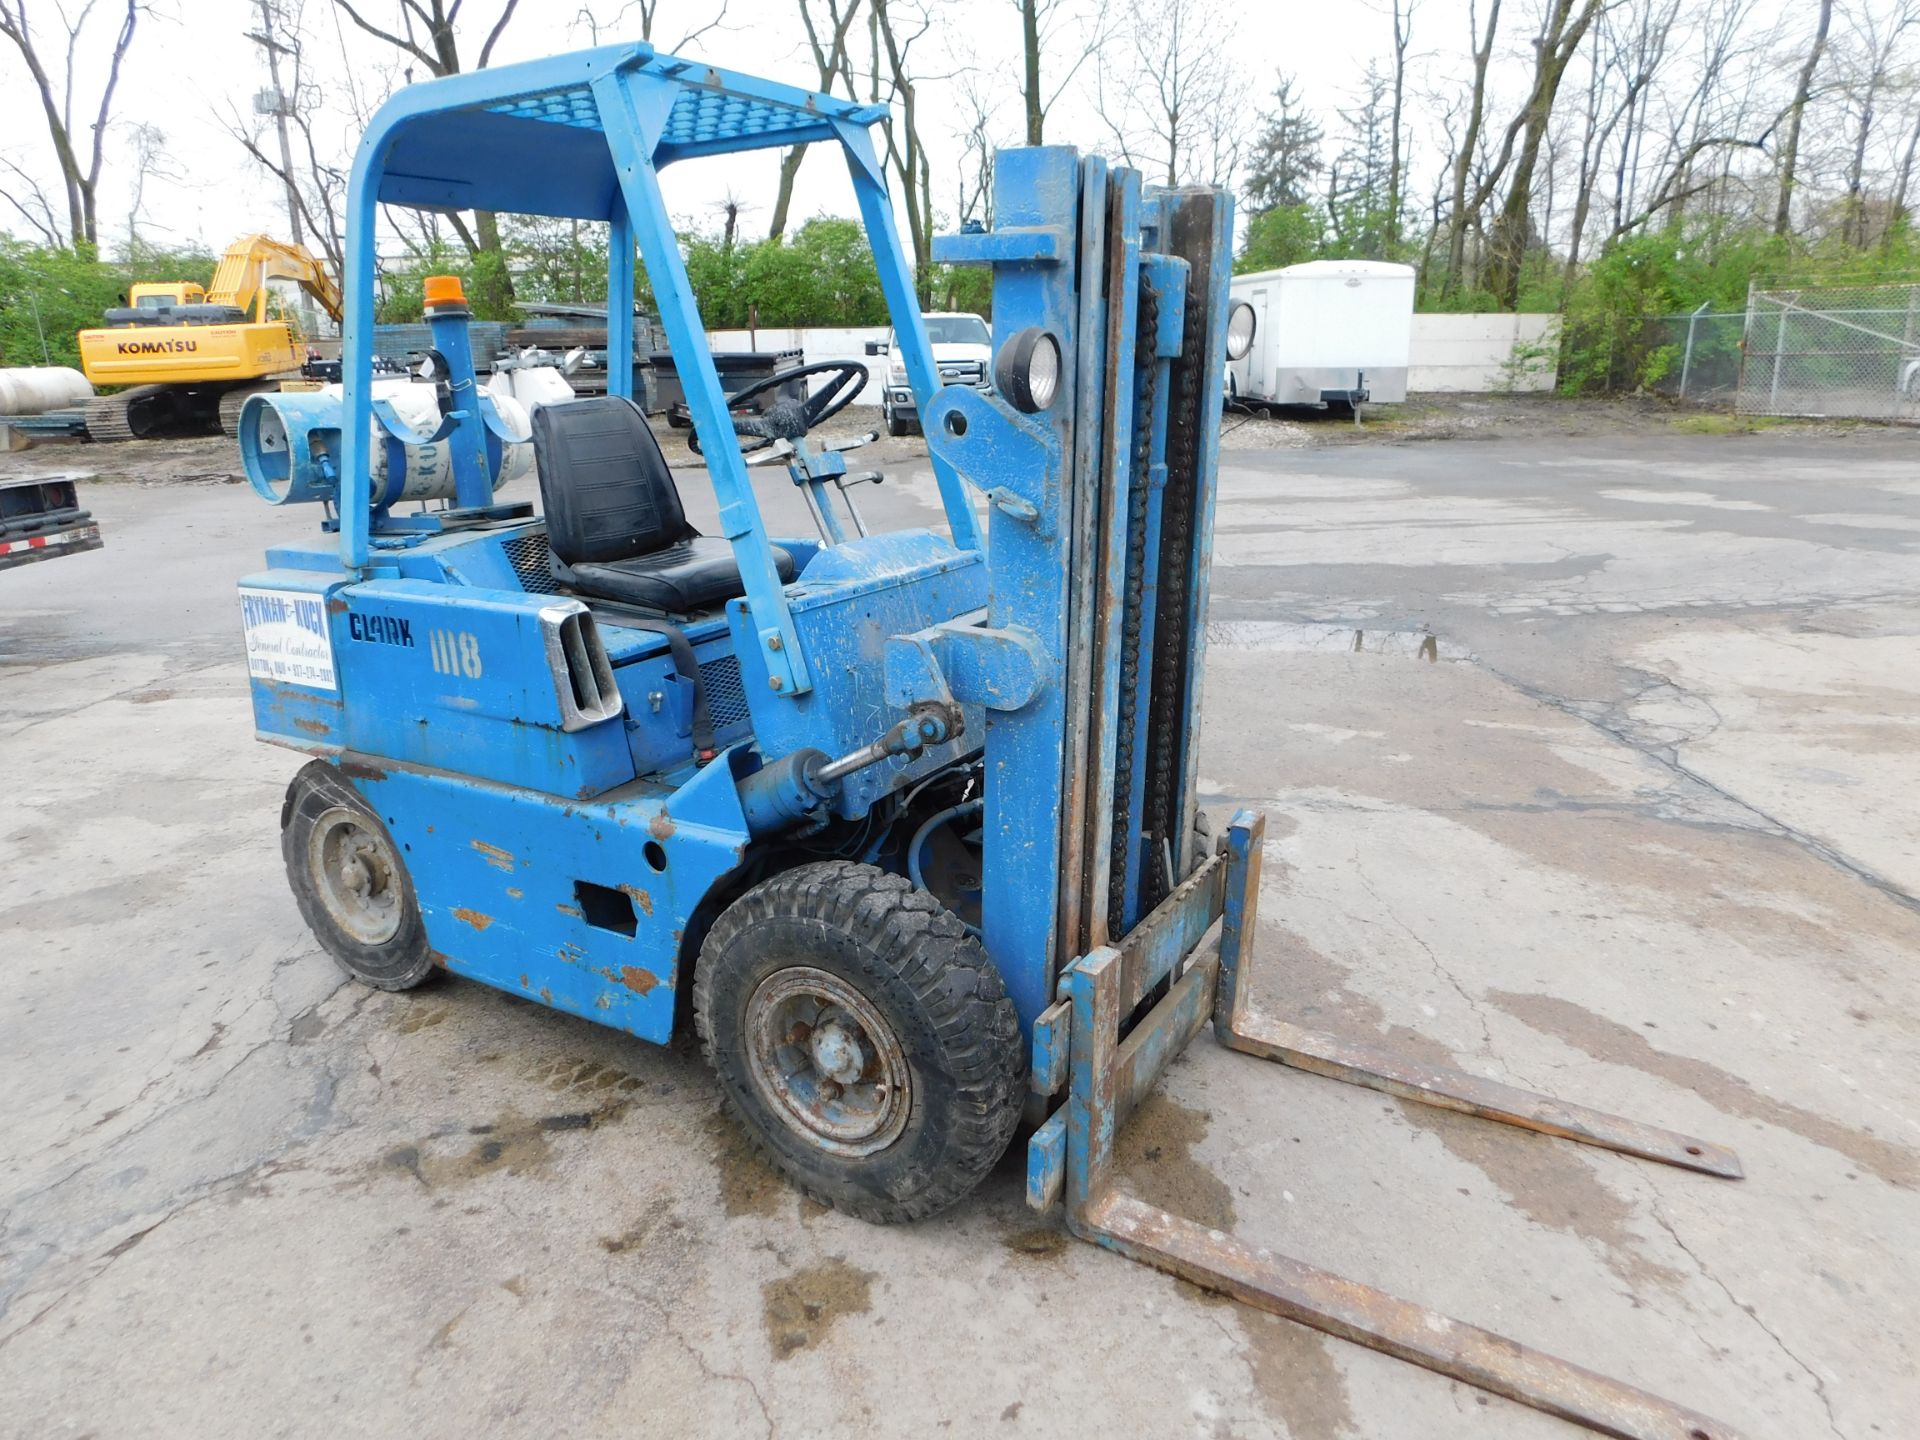 Clark Fork Lift, LP Gas, Pneumatic Tires, 3-Stage Mast, estimated 5,000 lbs. Capacity